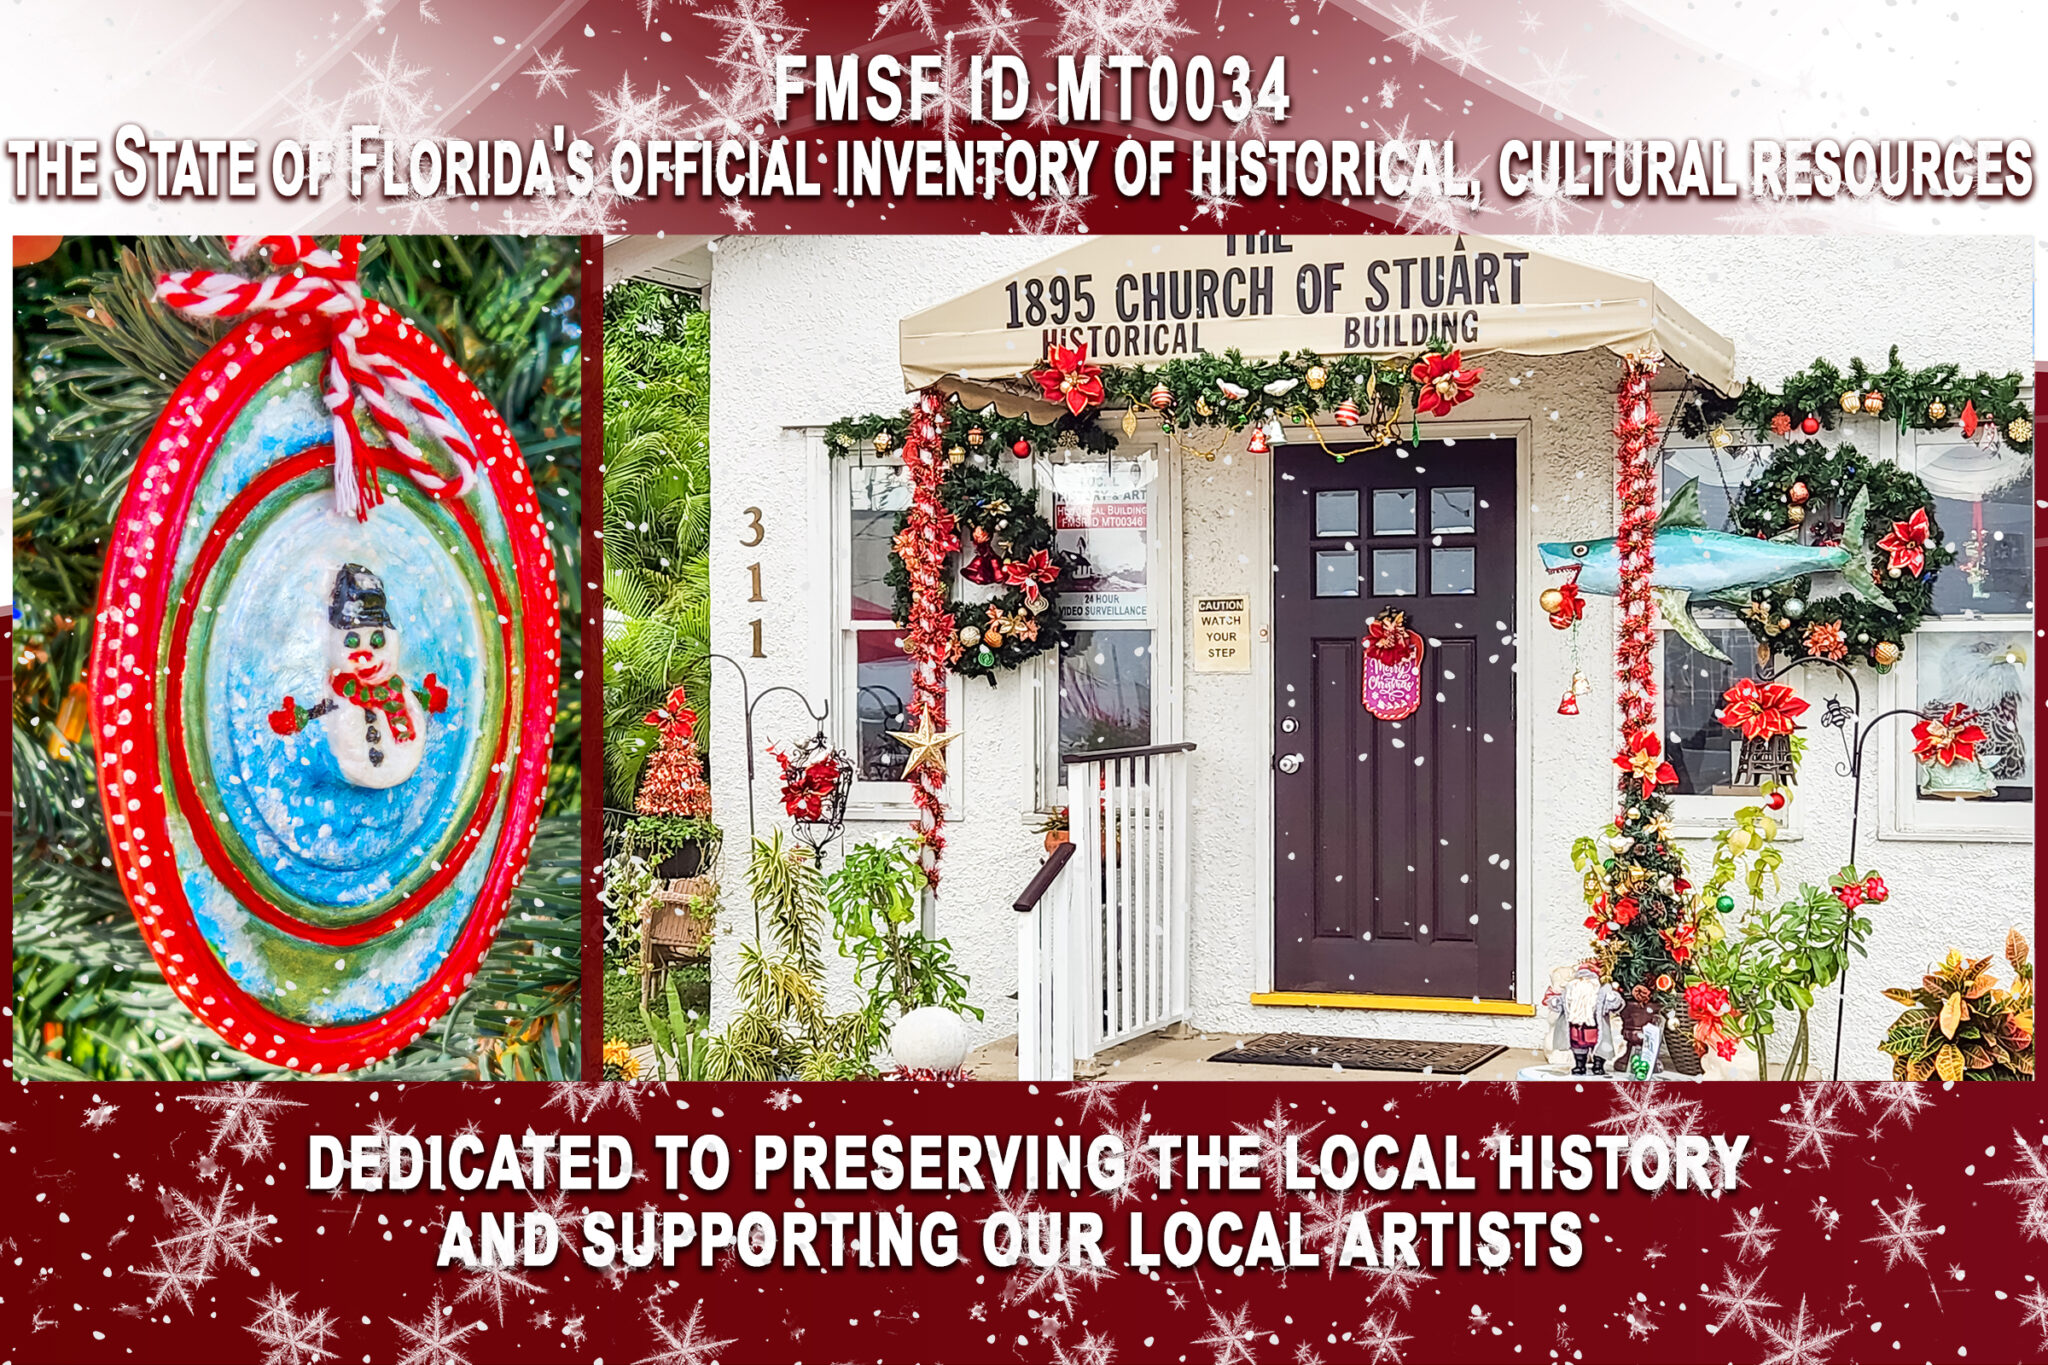 The 1895 Church of StuArt is a historical historical building of the first community church built in Stuart in 1895, and the oldest church building located in what is now Martin County, Florida. Supporting local history and art. Olga Hamilton Fine Art Studio. Art for sale in Stuart, Martin County, Florida. MartinArts. Wearable Art. Discover Martin County. The Creek District.